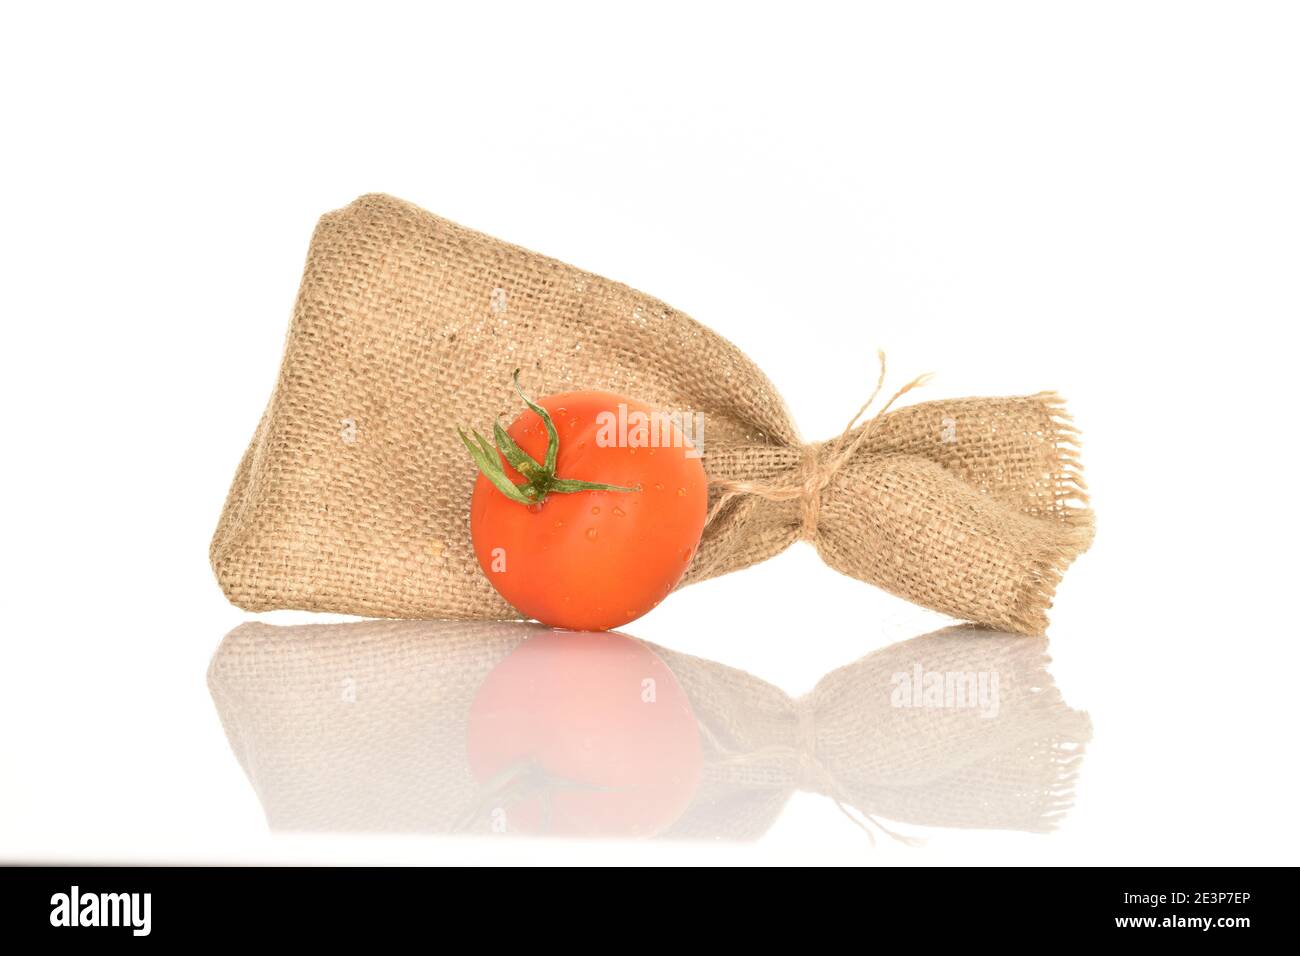 One whole red ripe juicy tomato with a green ponytail near a jute bag, on a white background. Stock Photo